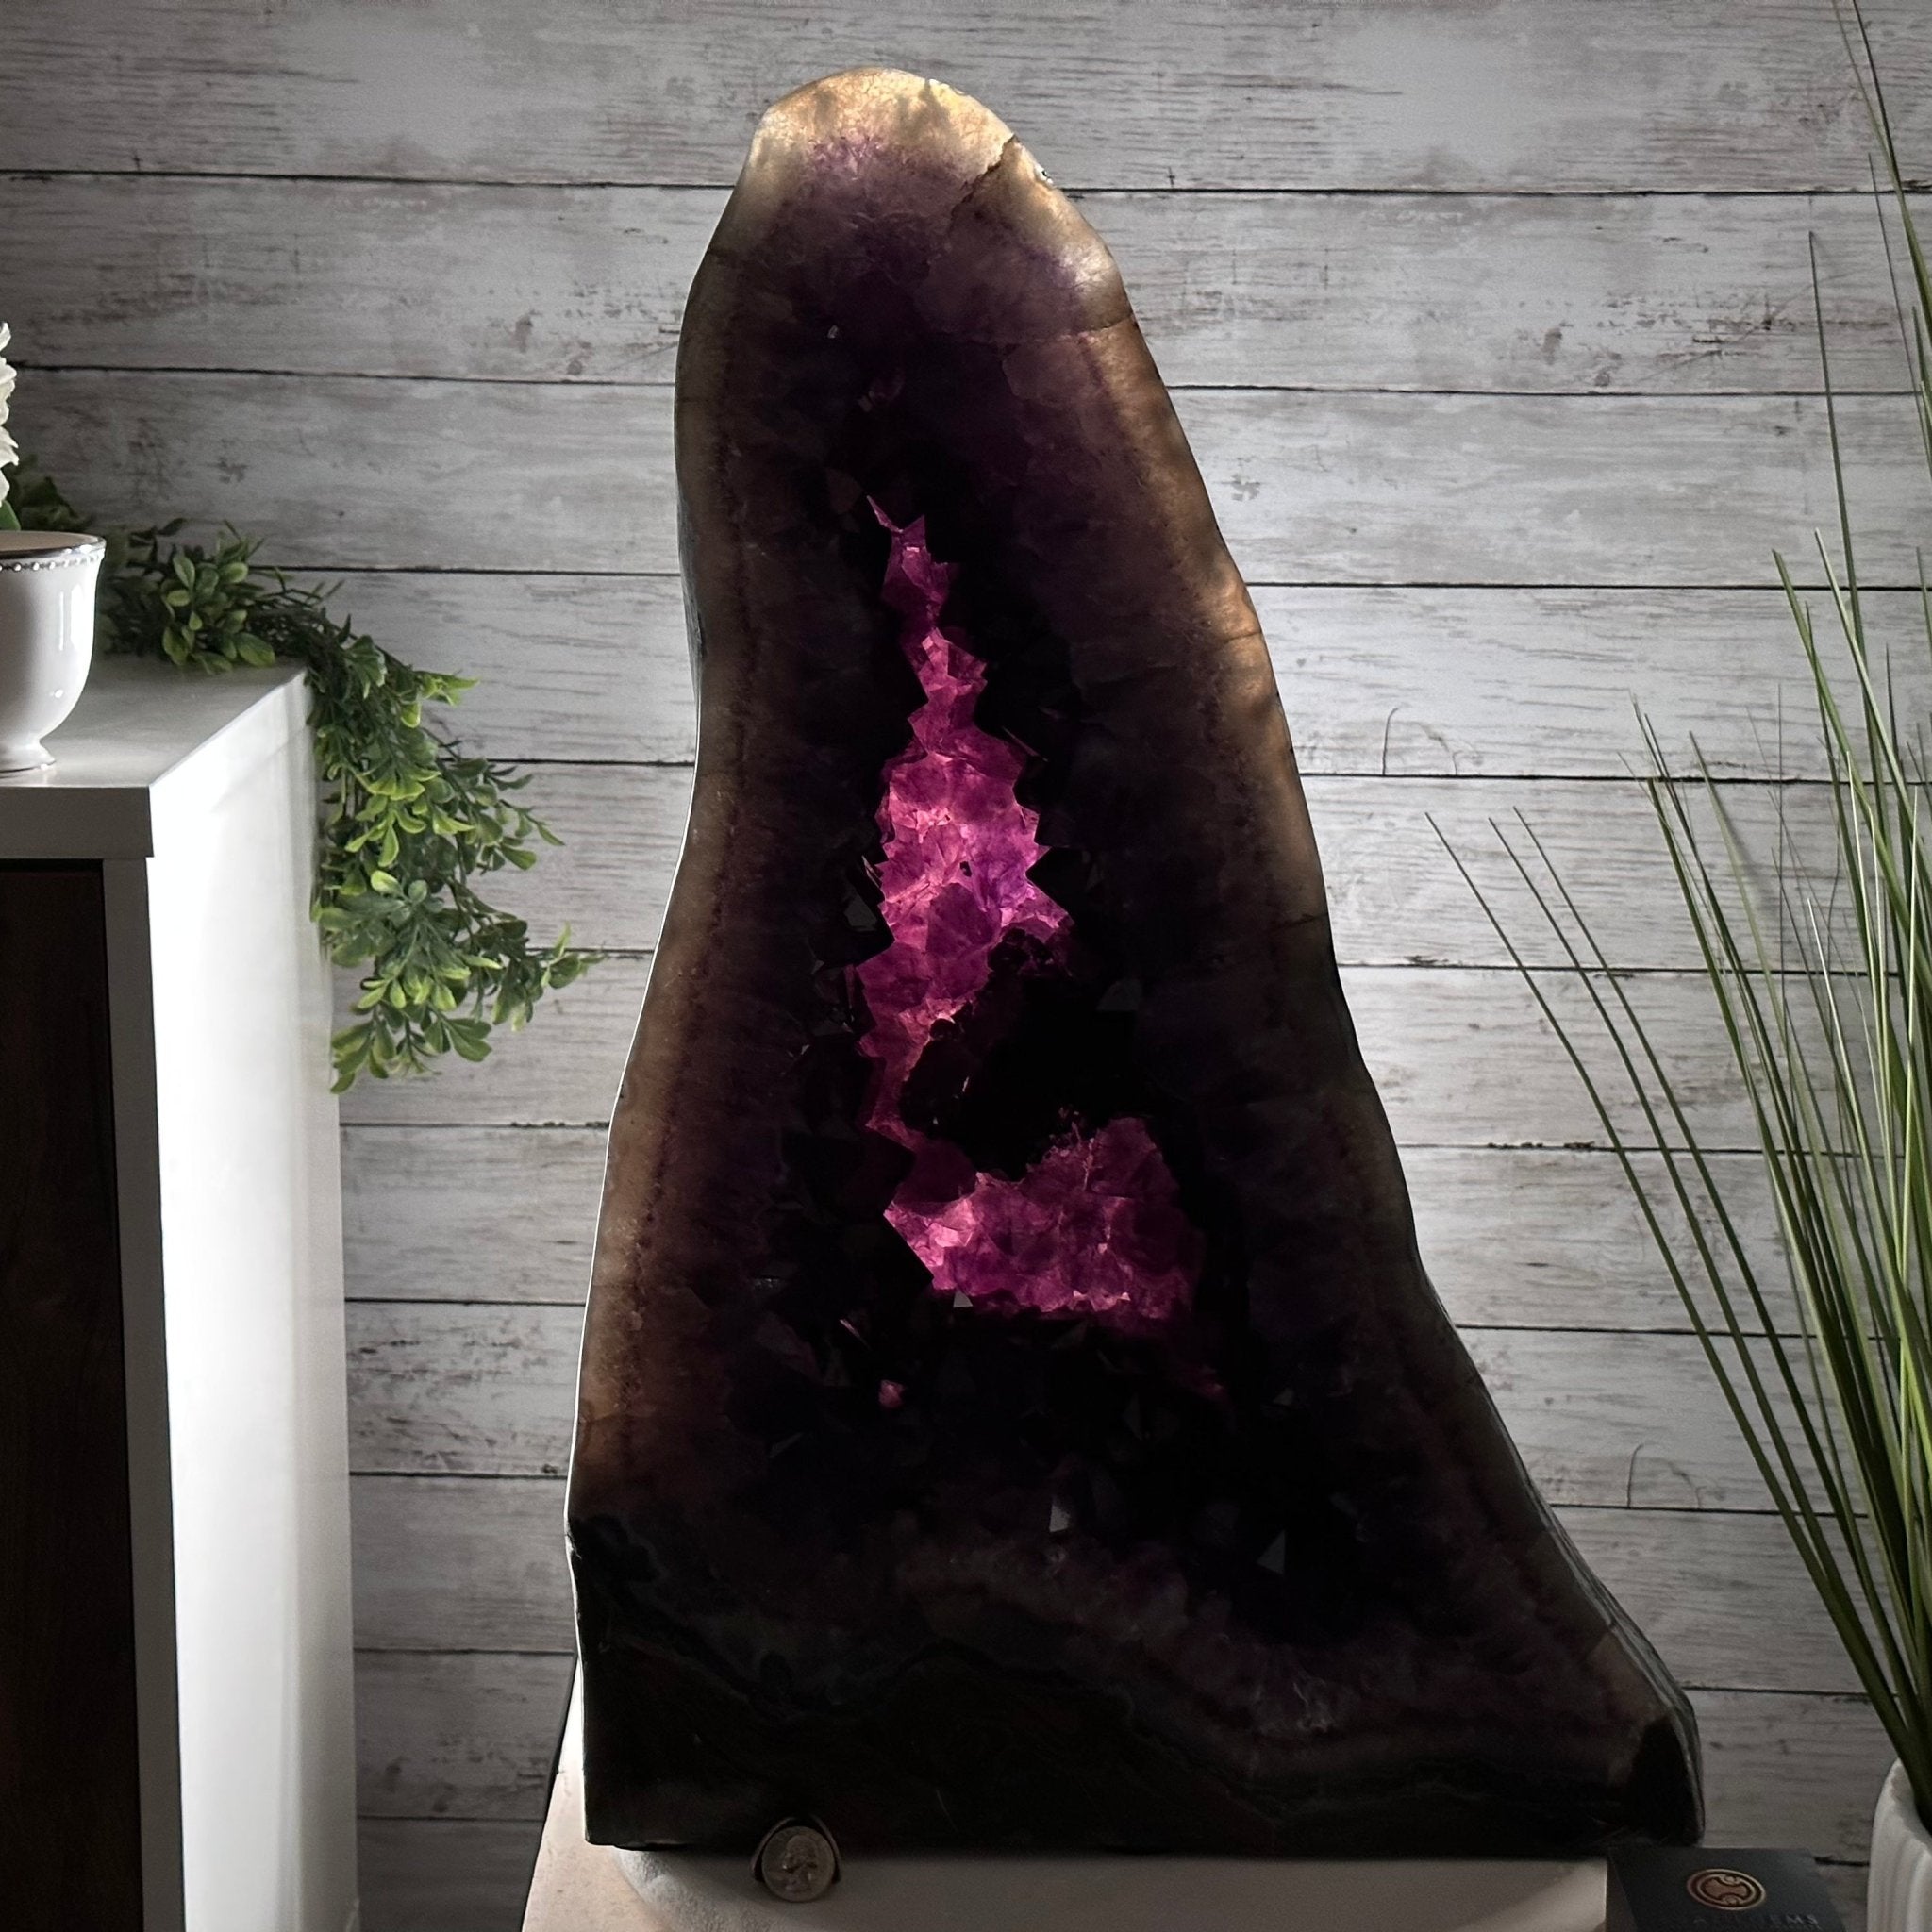 Extra Plus Quality Polished Brazilian Amethyst Cathedral, 103.7 lbs & 23" tall Model #5602-0061 by Brazil Gems - Brazil GemsBrazil GemsExtra Plus Quality Polished Brazilian Amethyst Cathedral, 103.7 lbs & 23" tall Model #5602-0061 by Brazil GemsPolished Cathedrals5602-0061